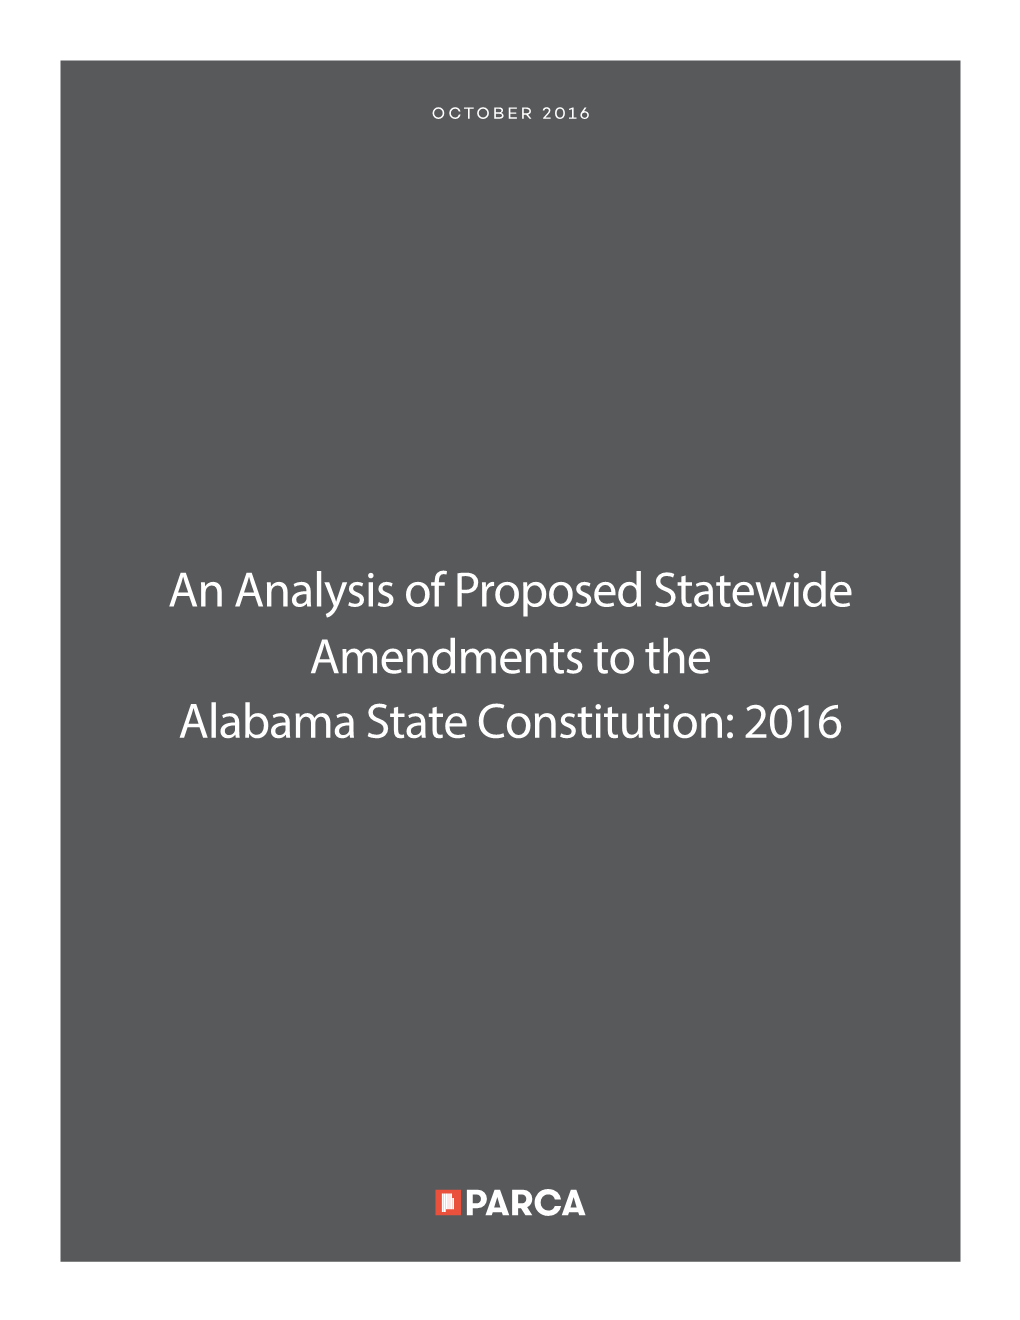 An Analysis of Proposed Statewide Amendments to the Alabama State Constitution: 2016